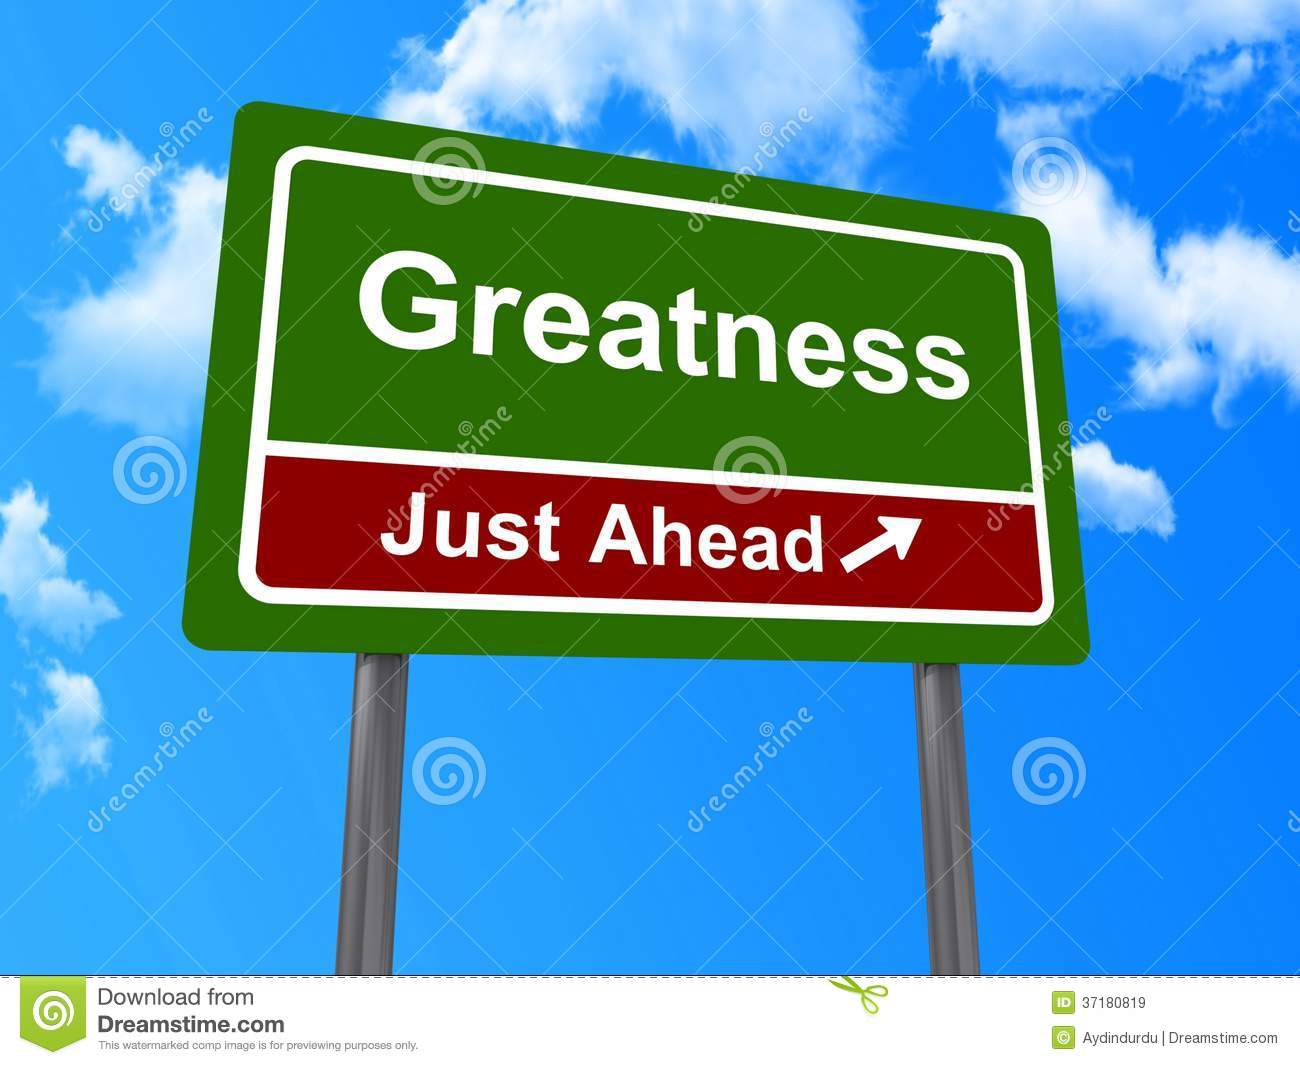 Where Your Greatness Is